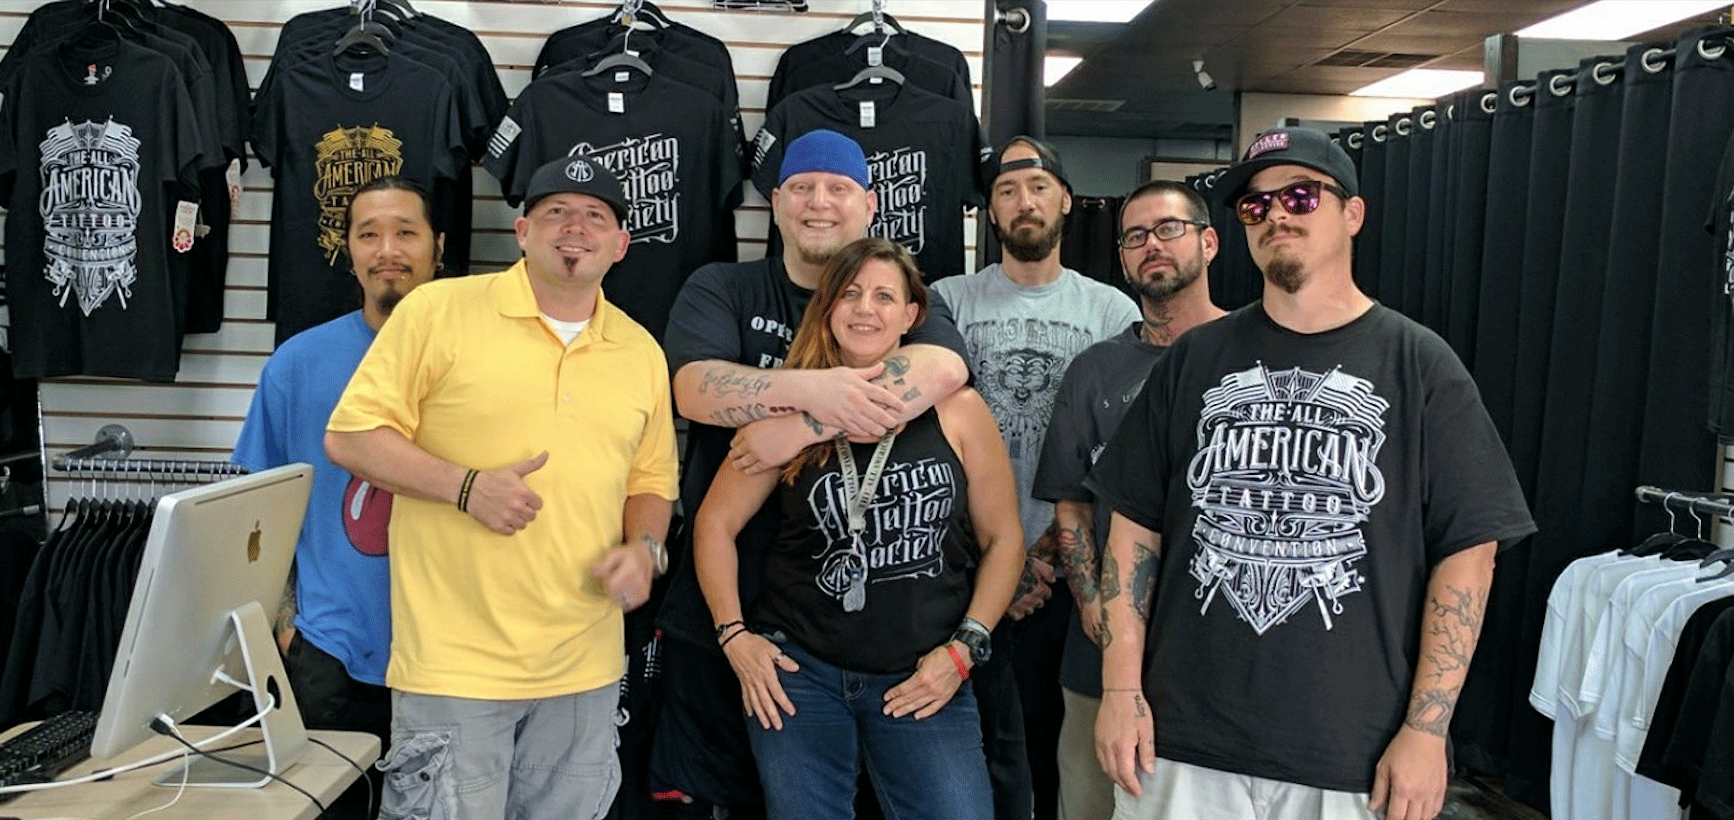 American Tattoo Society Partners with Operation Tattooing Freedom